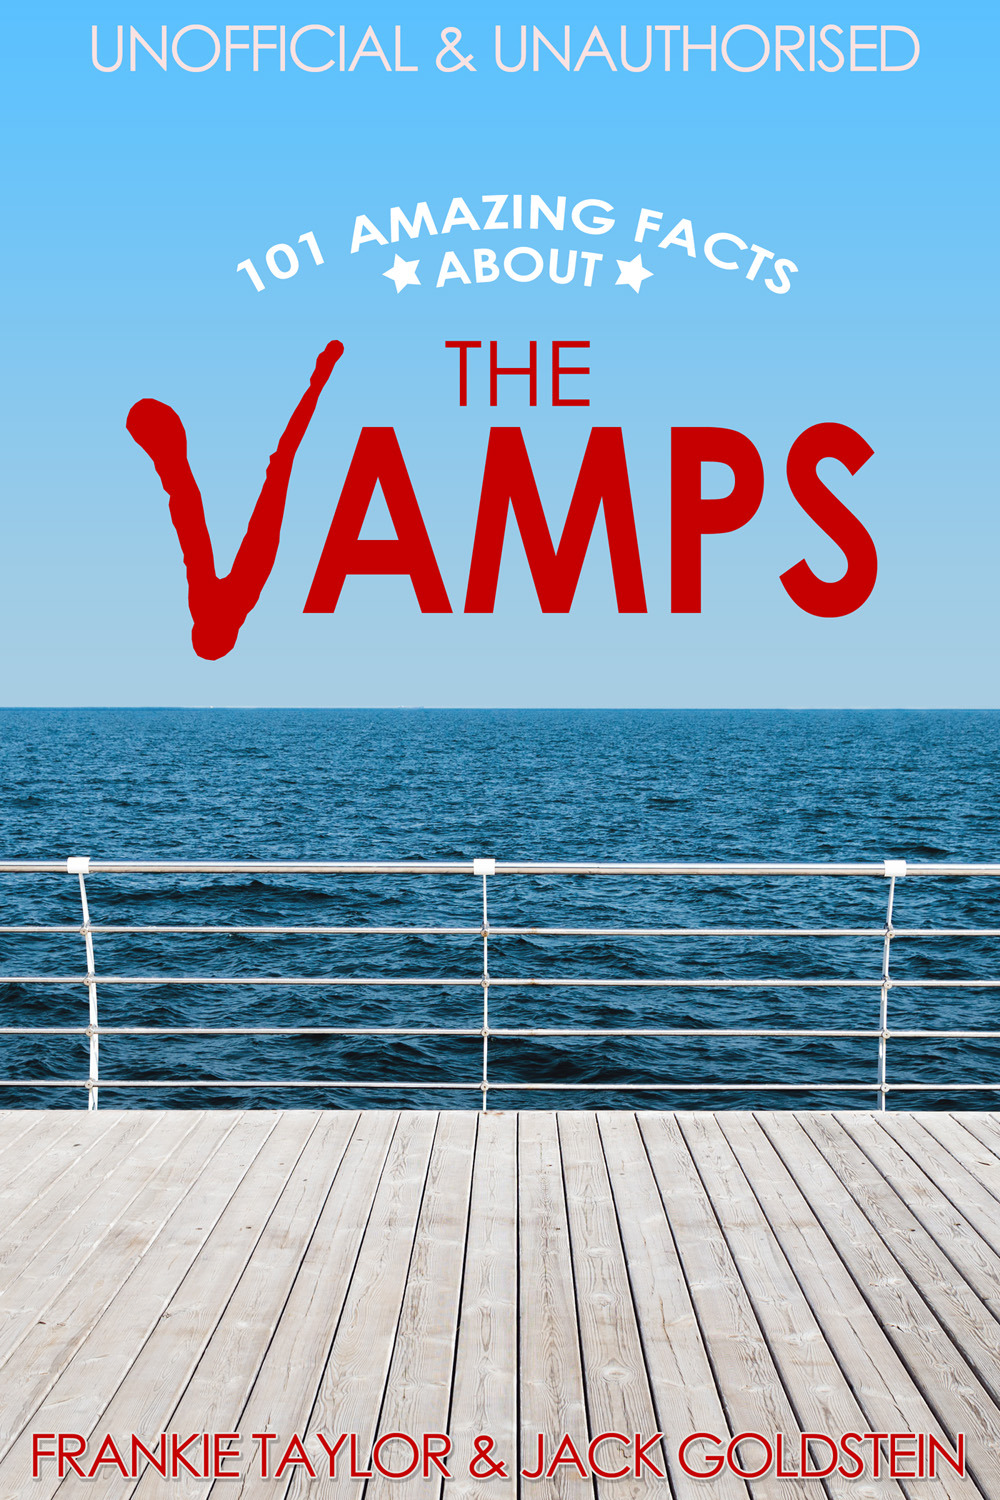 Goldstein, Jack - 101 Amazing Facts about The Vamps, ebook